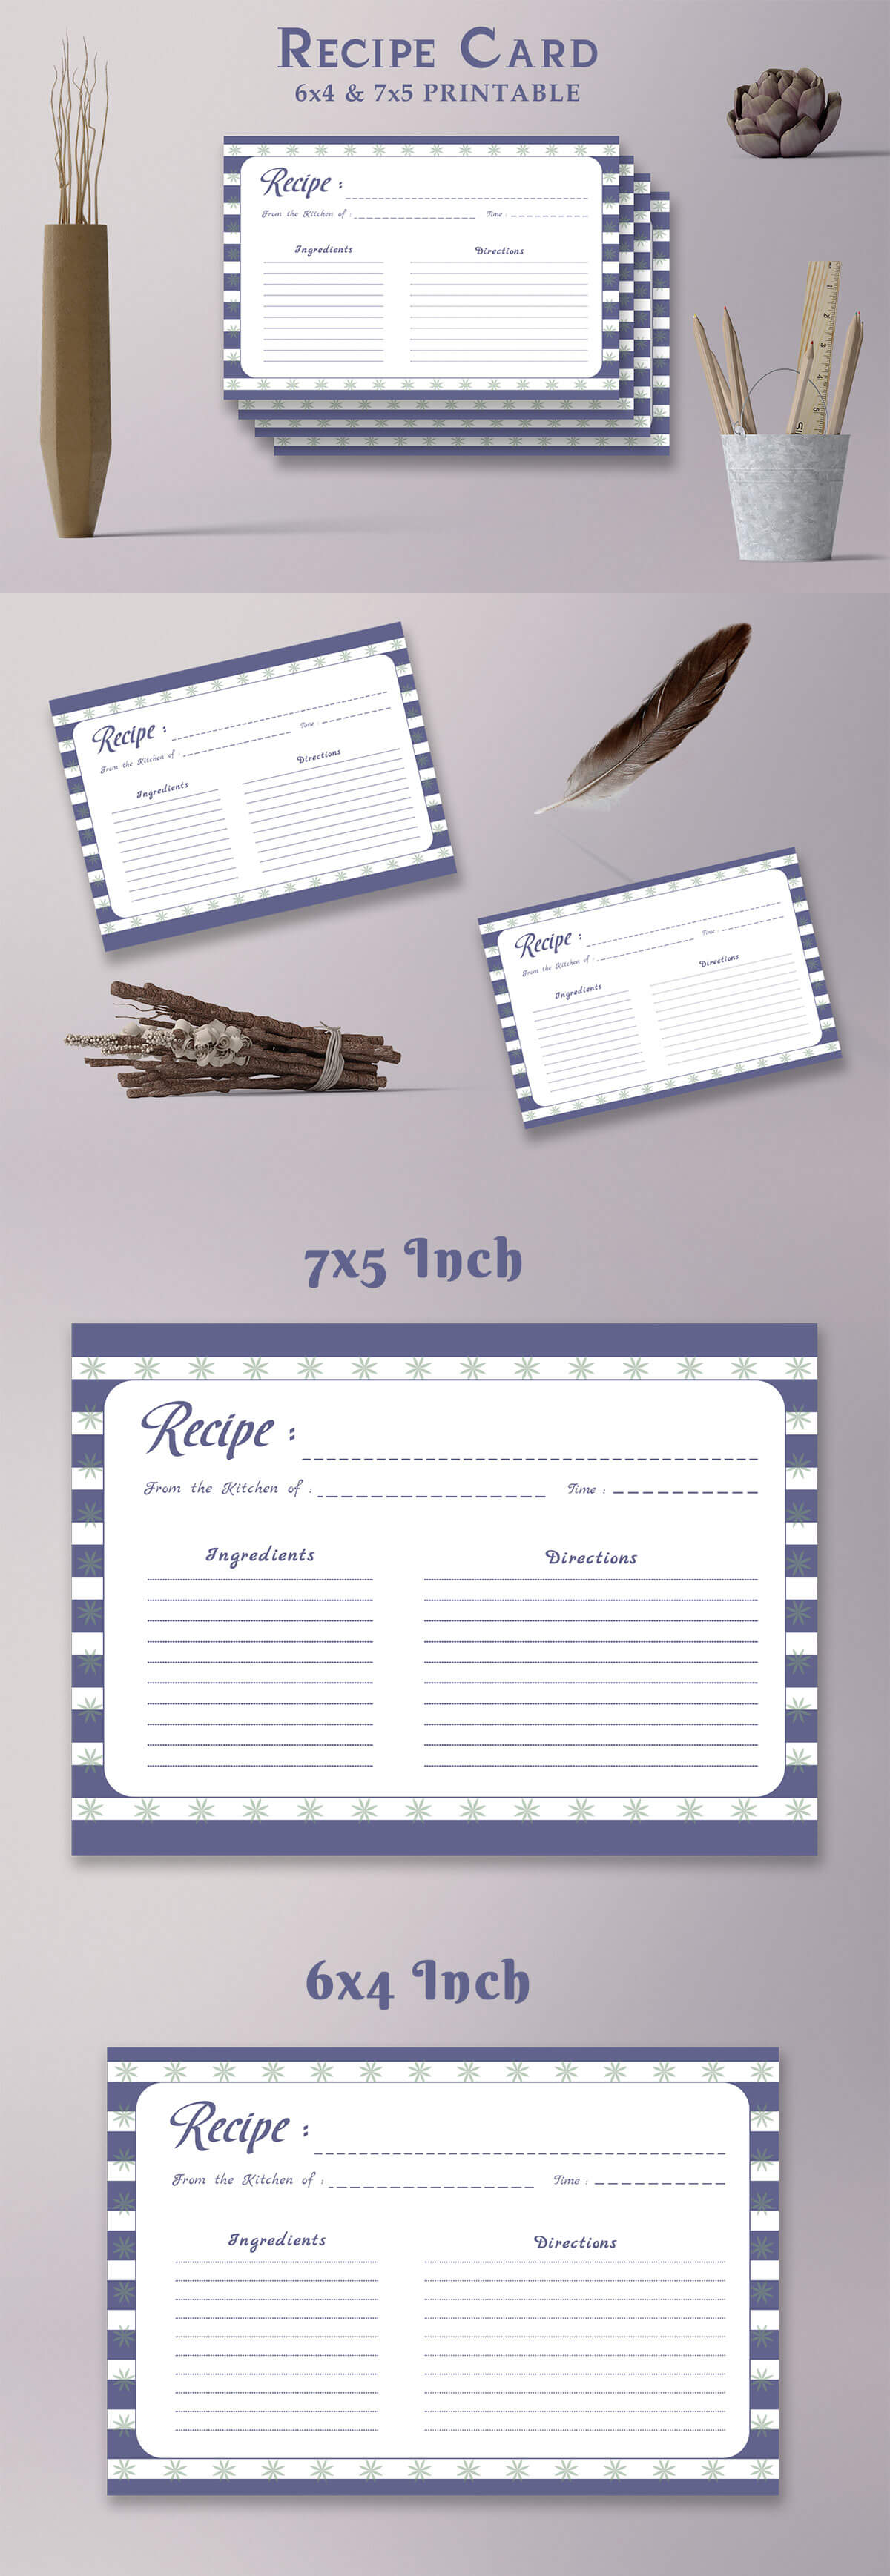 Free Patterned Recipe Card Template V21